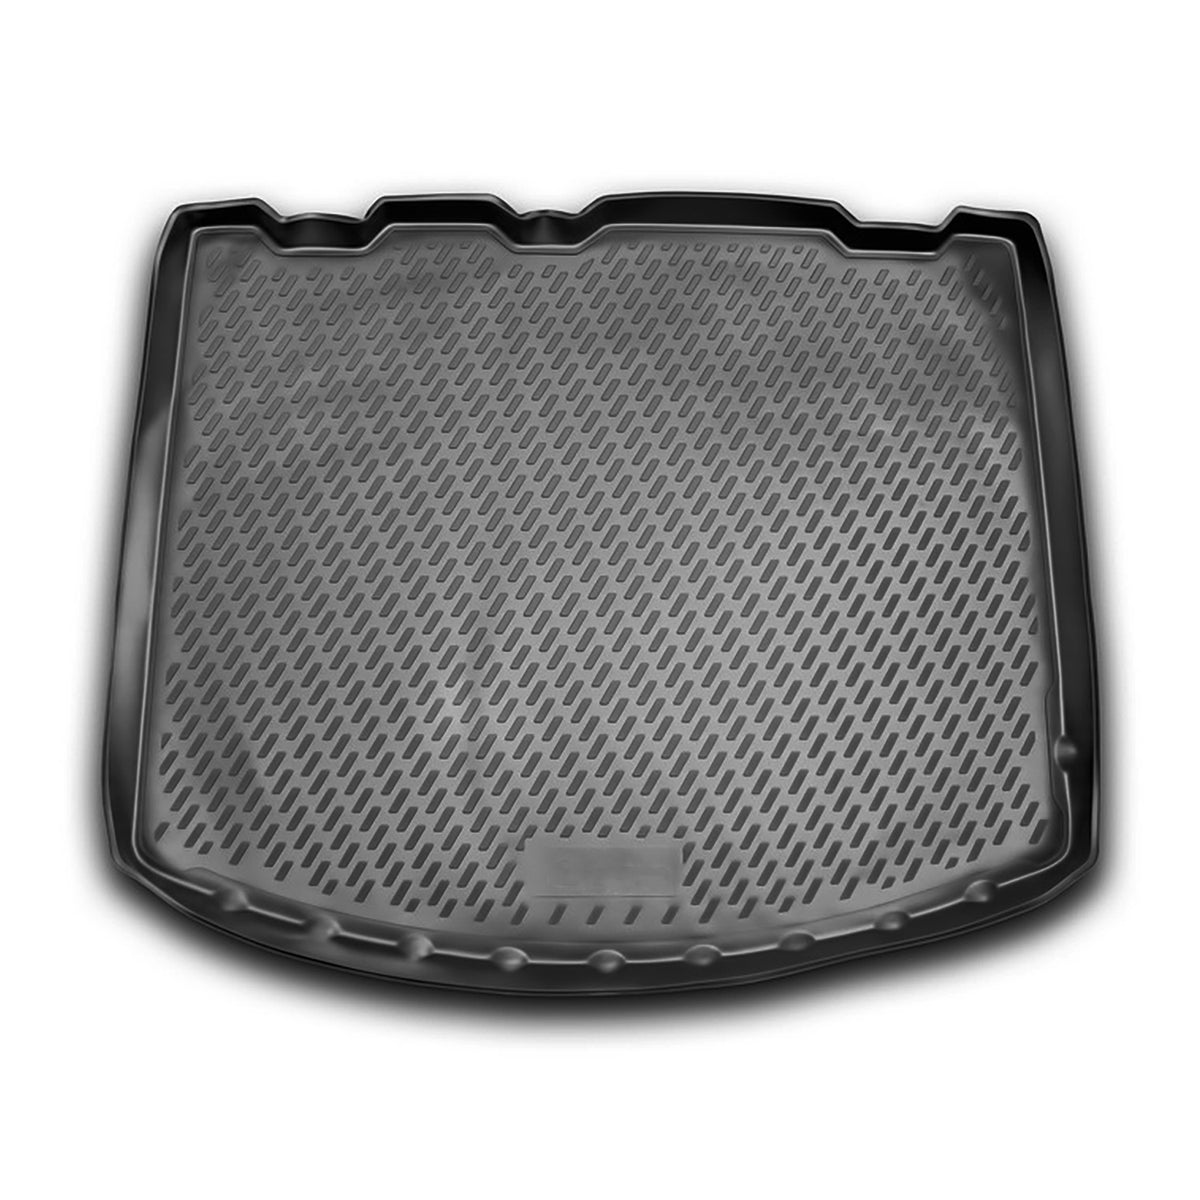 Boot mat boot liner for Ford Kuga 2012-2019 rubber TPE black